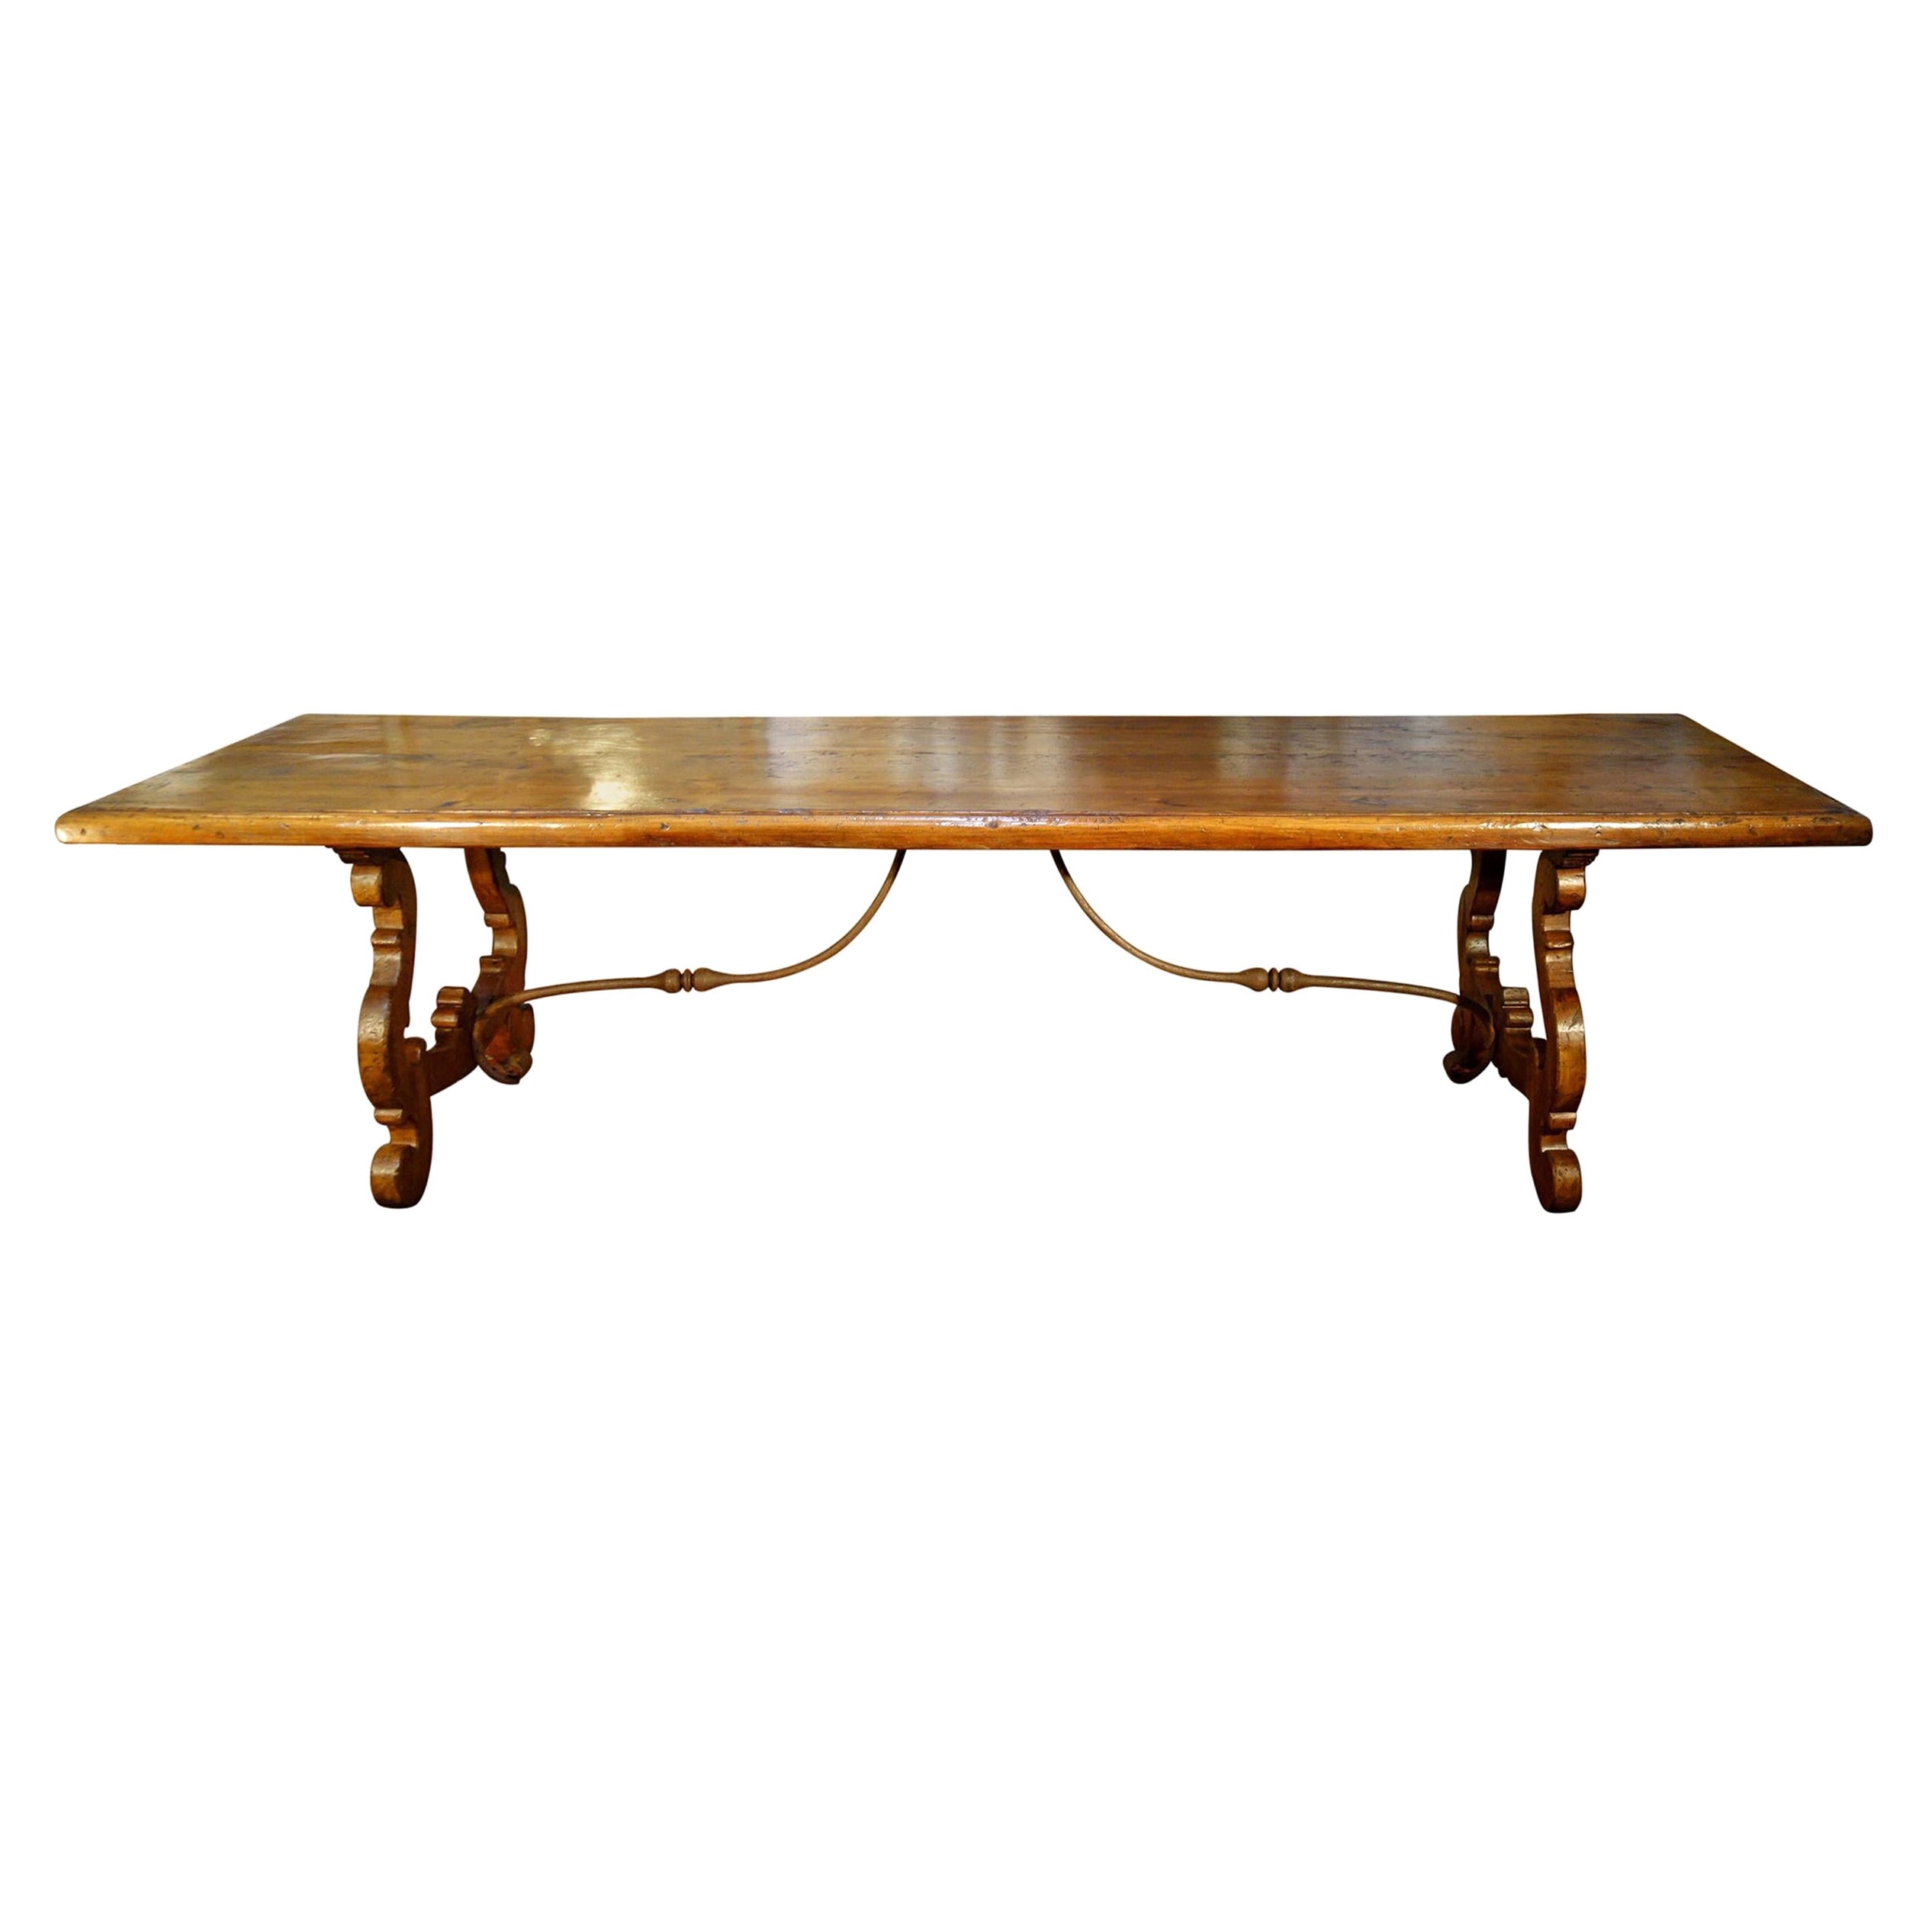 17th C Style Italian LIRA Solid Walnut Refectory Table Forged Iron with options For Sale